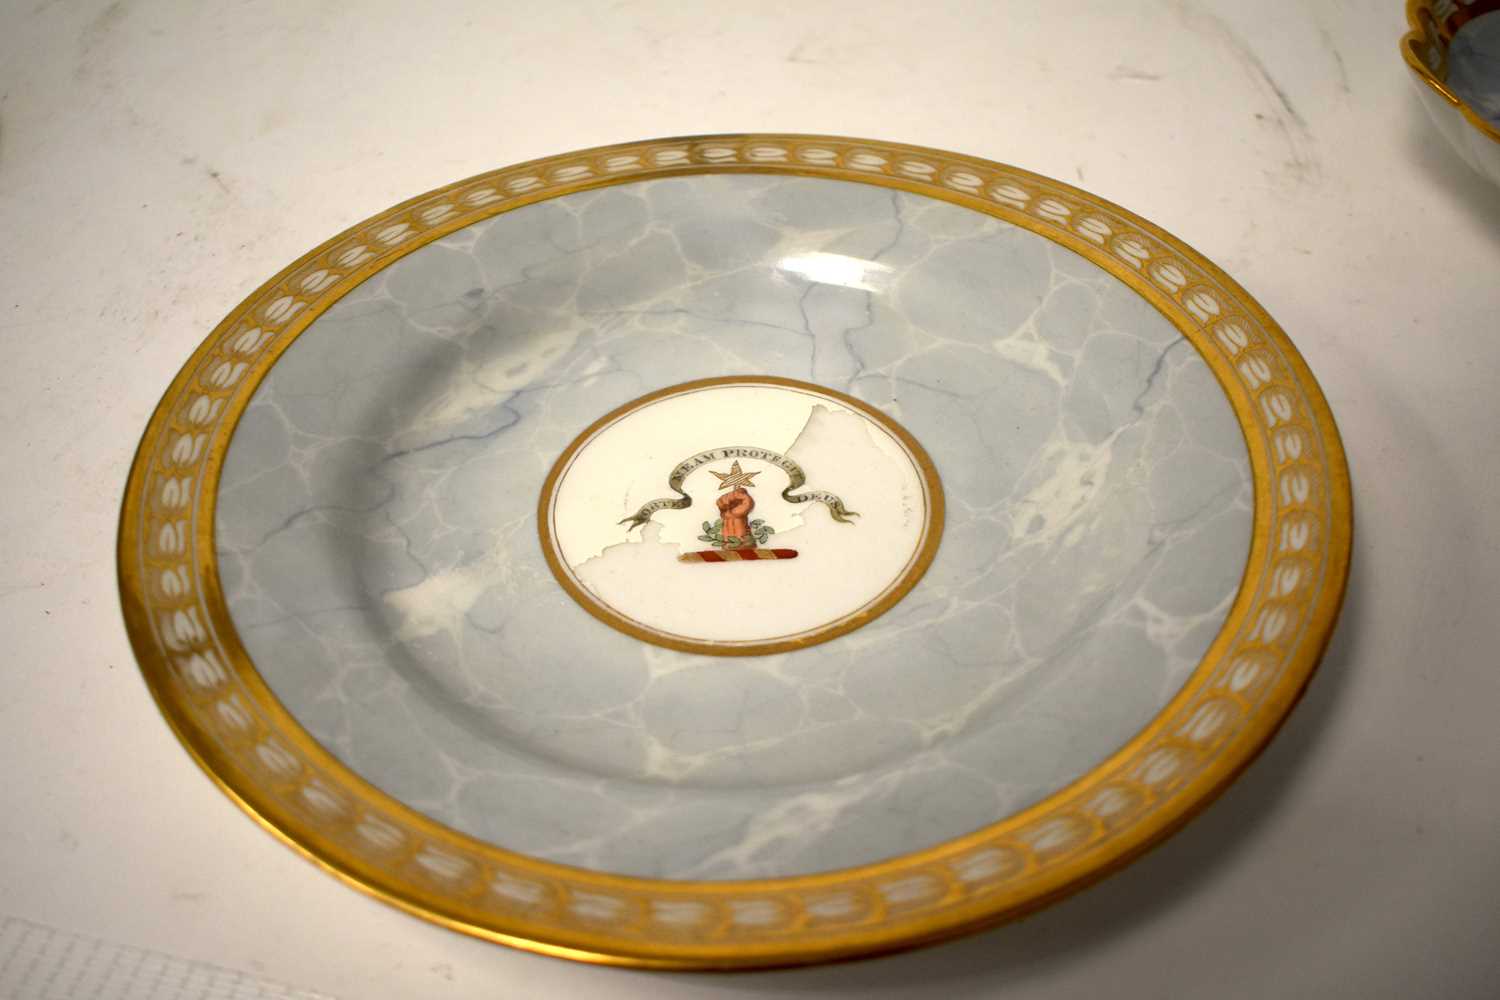 A LATE 18TH CENTURY GROUP OF BARR FLIGHT AND BARR PORCELAIN WARES painted with armorials on a - Image 22 of 31